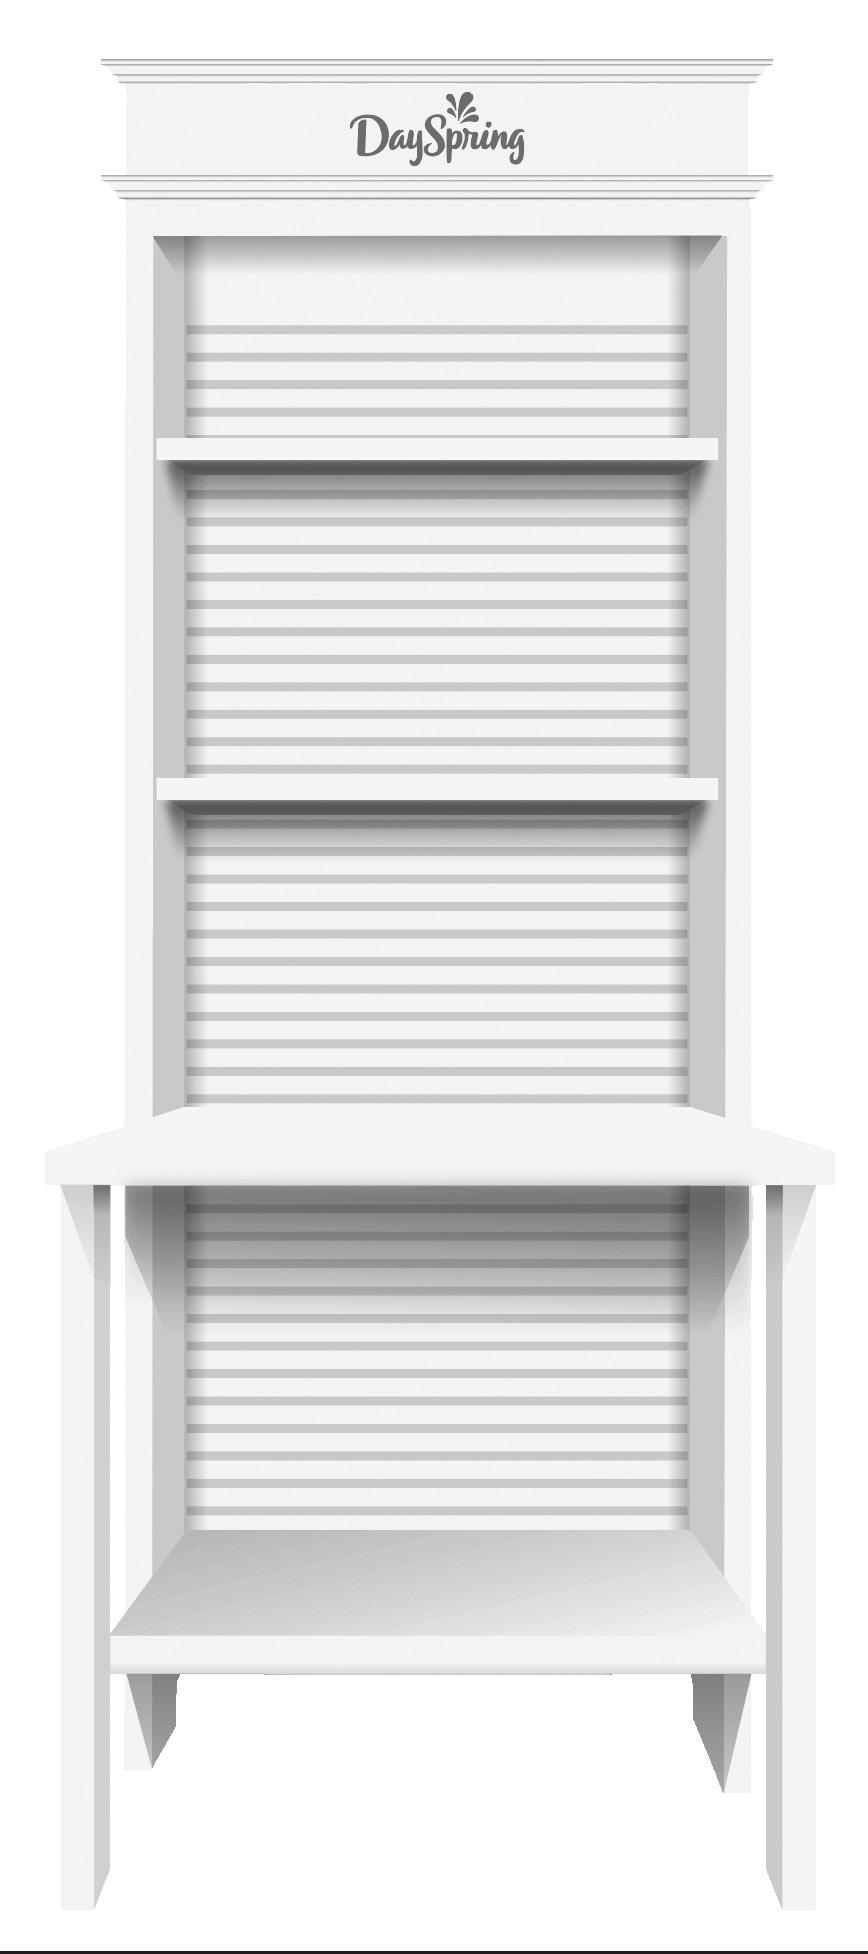 NEW! HUTCH END CAP PLEASE NOTE: For use on back-to-back DaySpring Counter Card Fixtures or 4' In-Line Gift